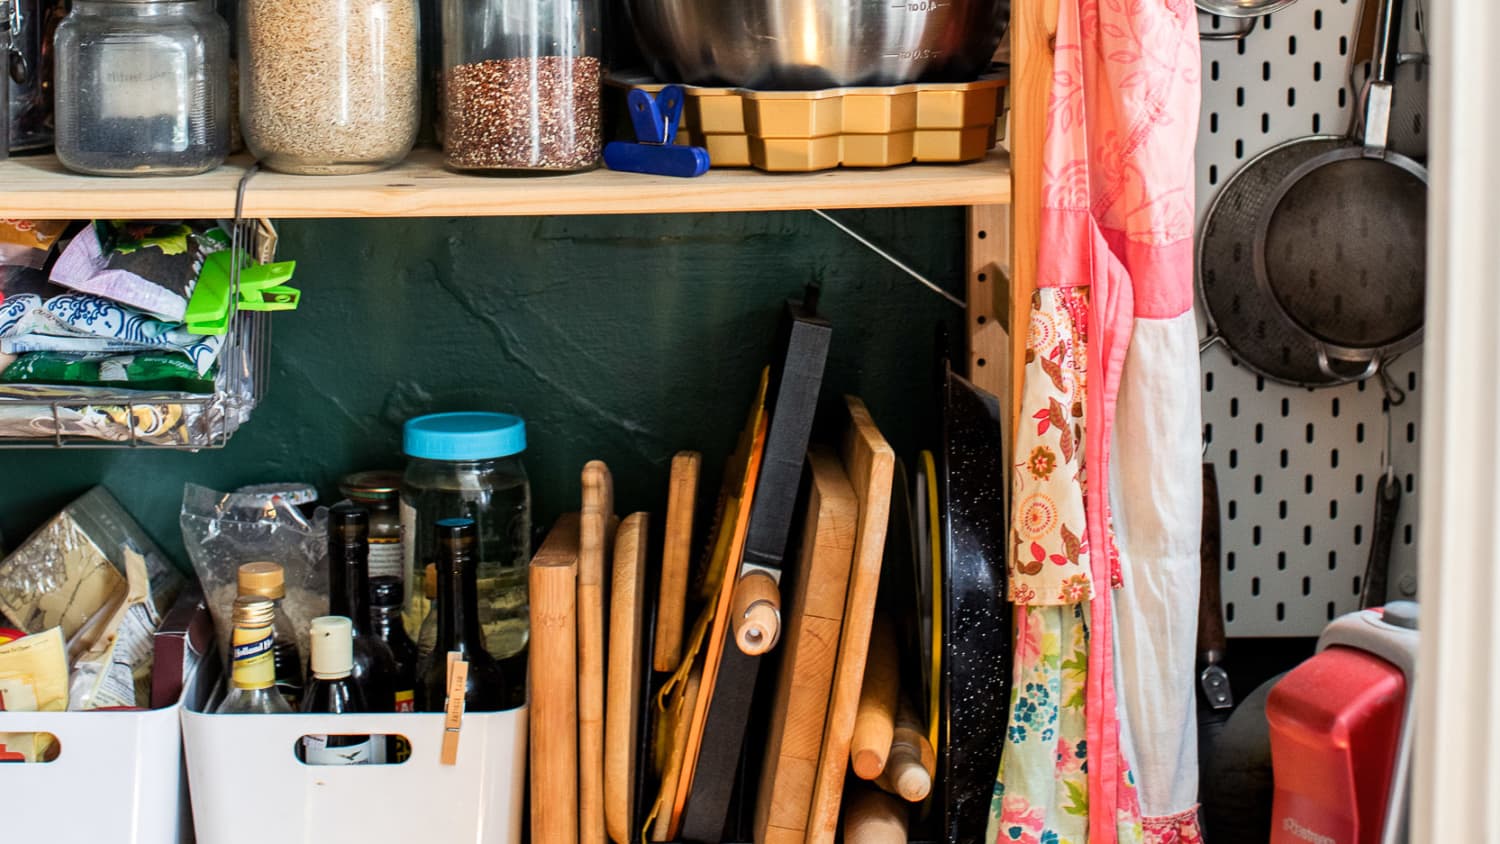 This Restaurant Food Storage Solution Does Wonders in My Home Kitchen